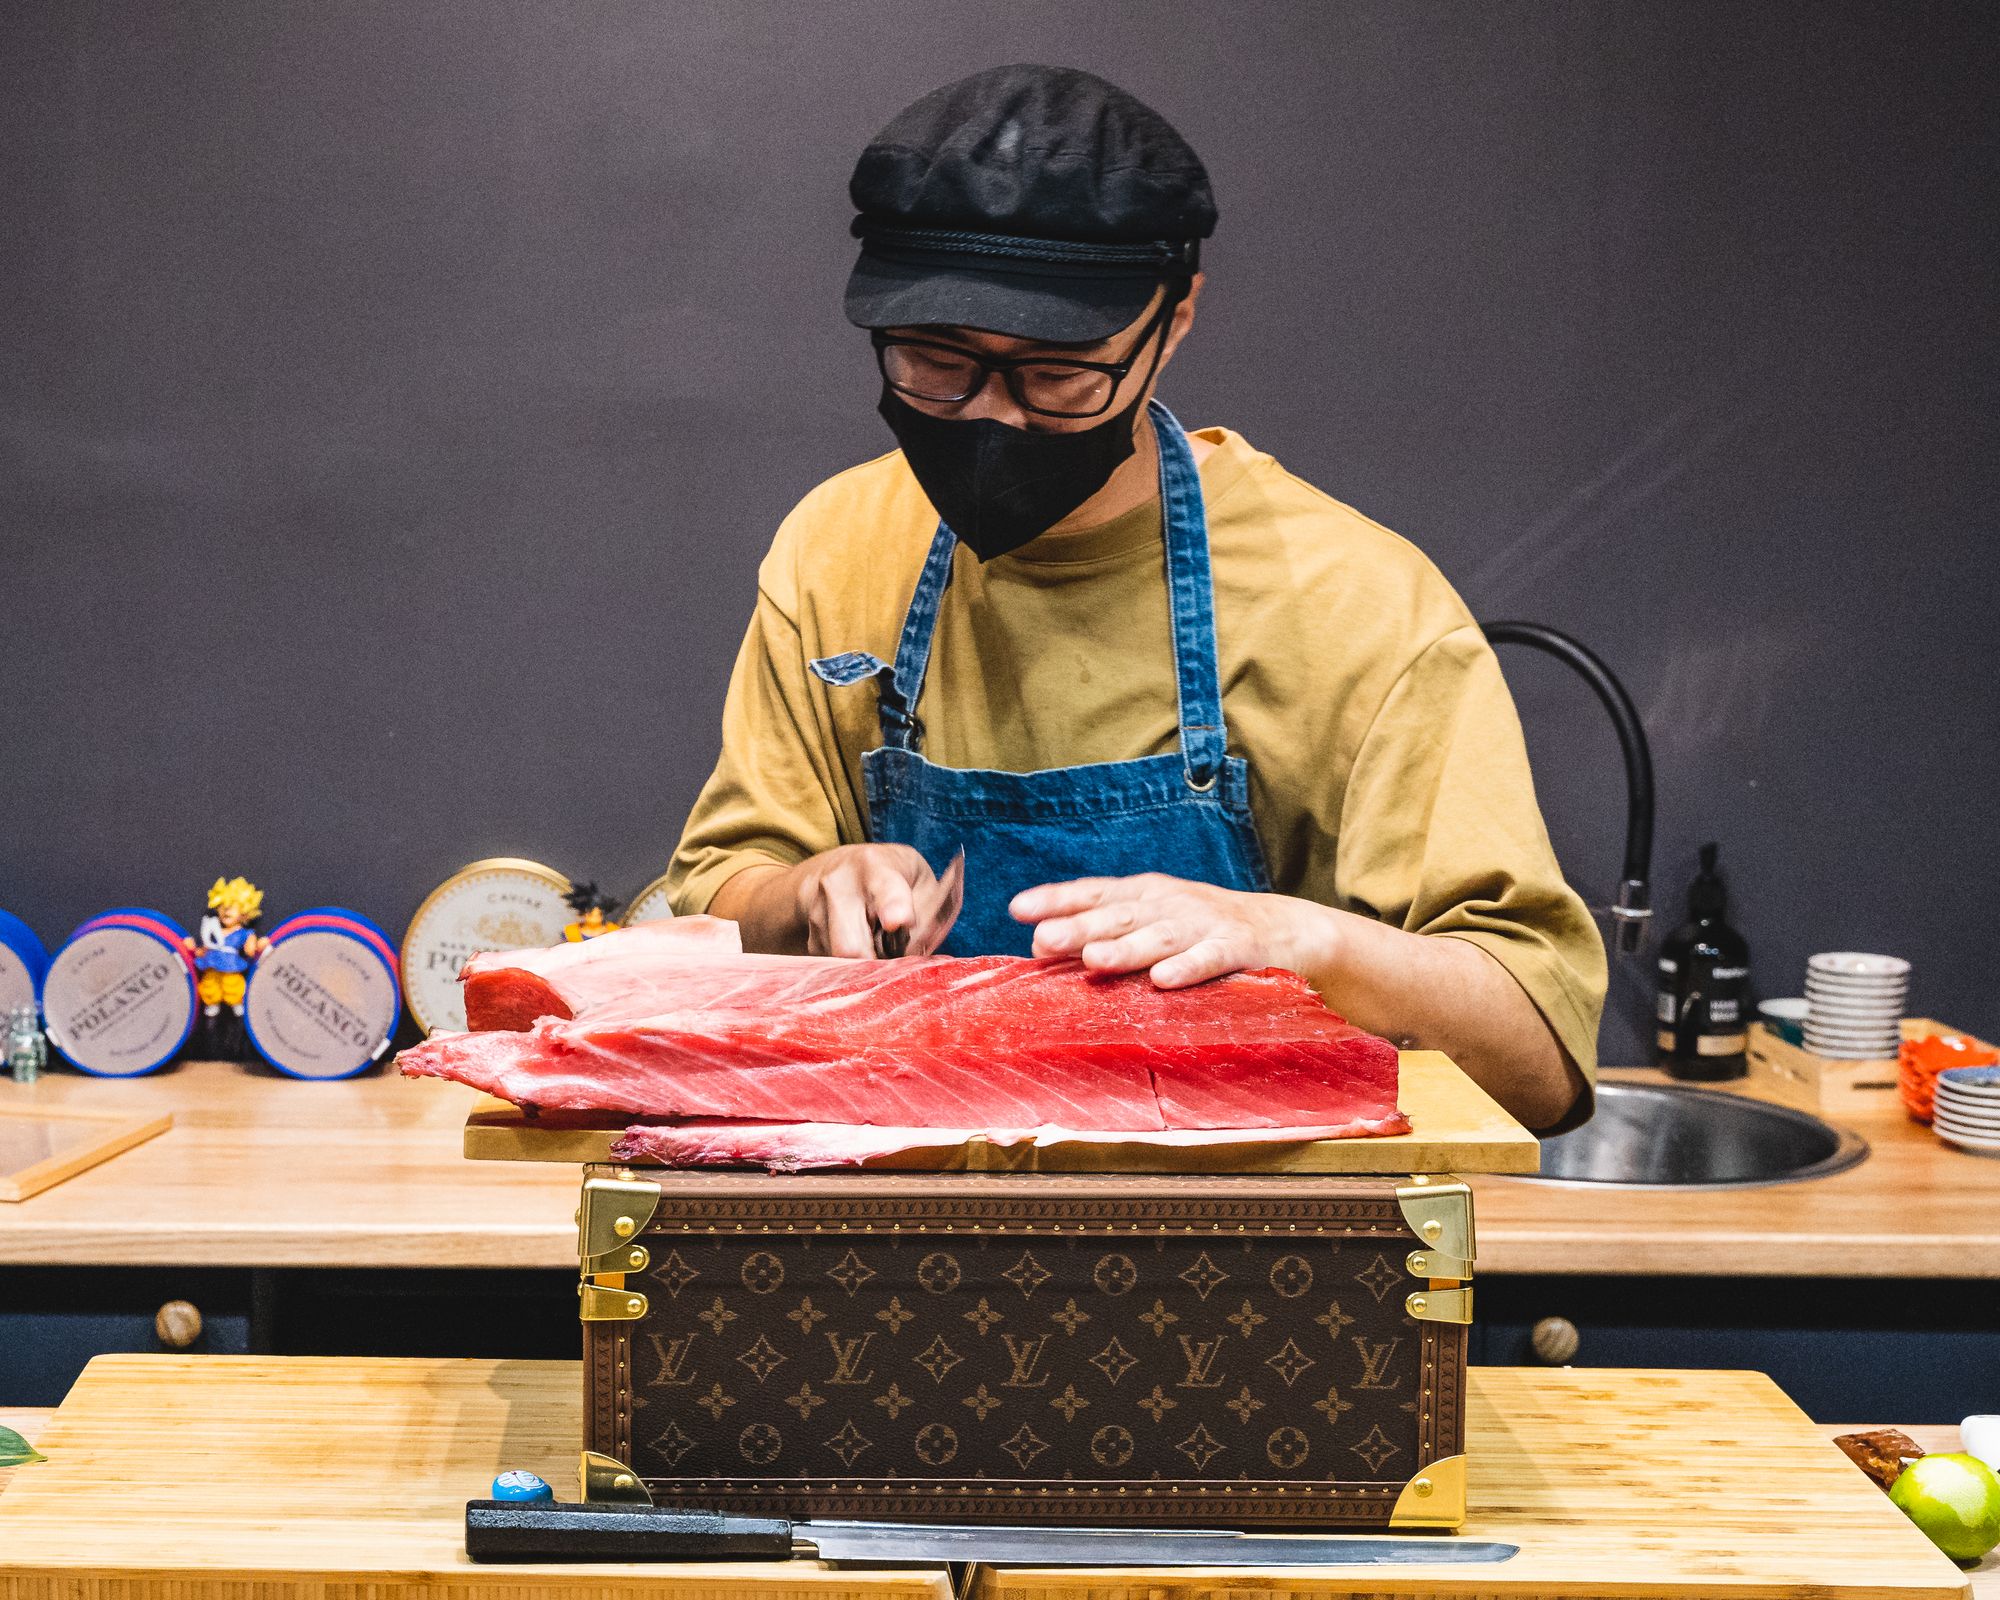 Chef slicing tuna on top of a LV branded chest